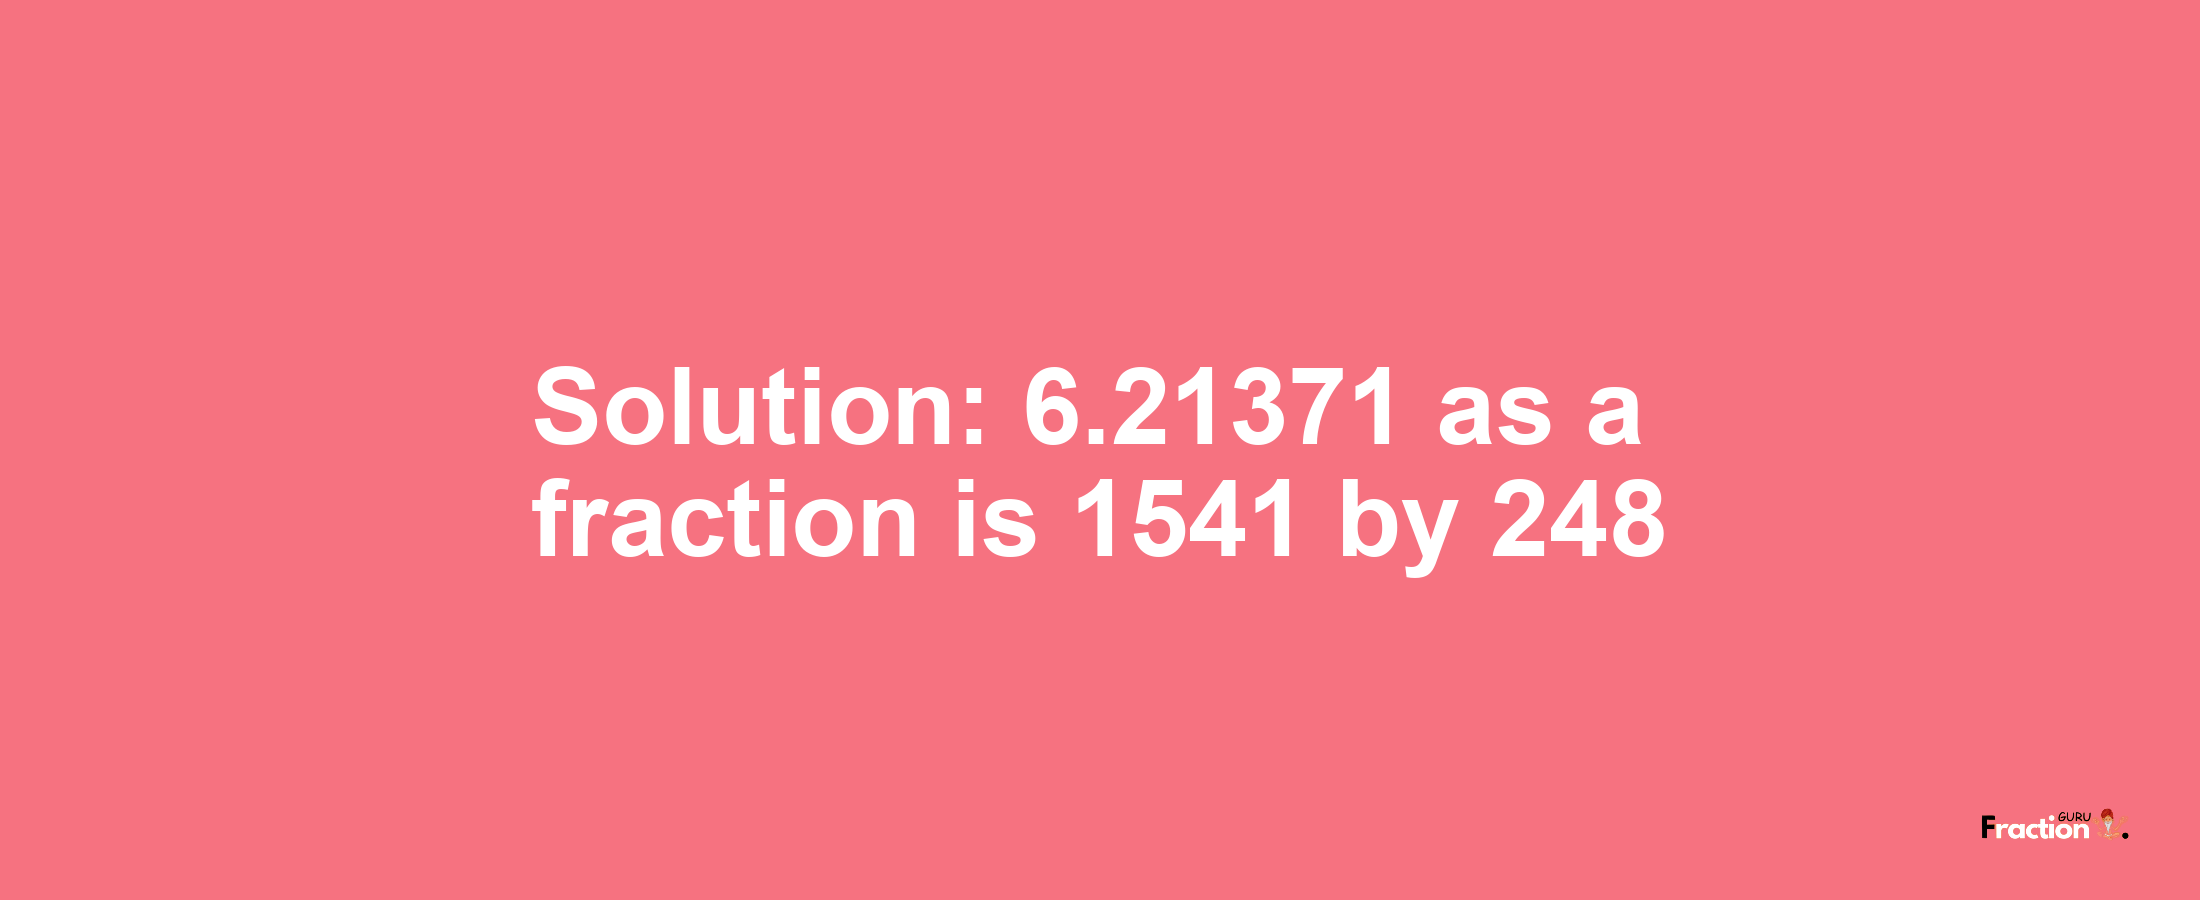 Solution:6.21371 as a fraction is 1541/248